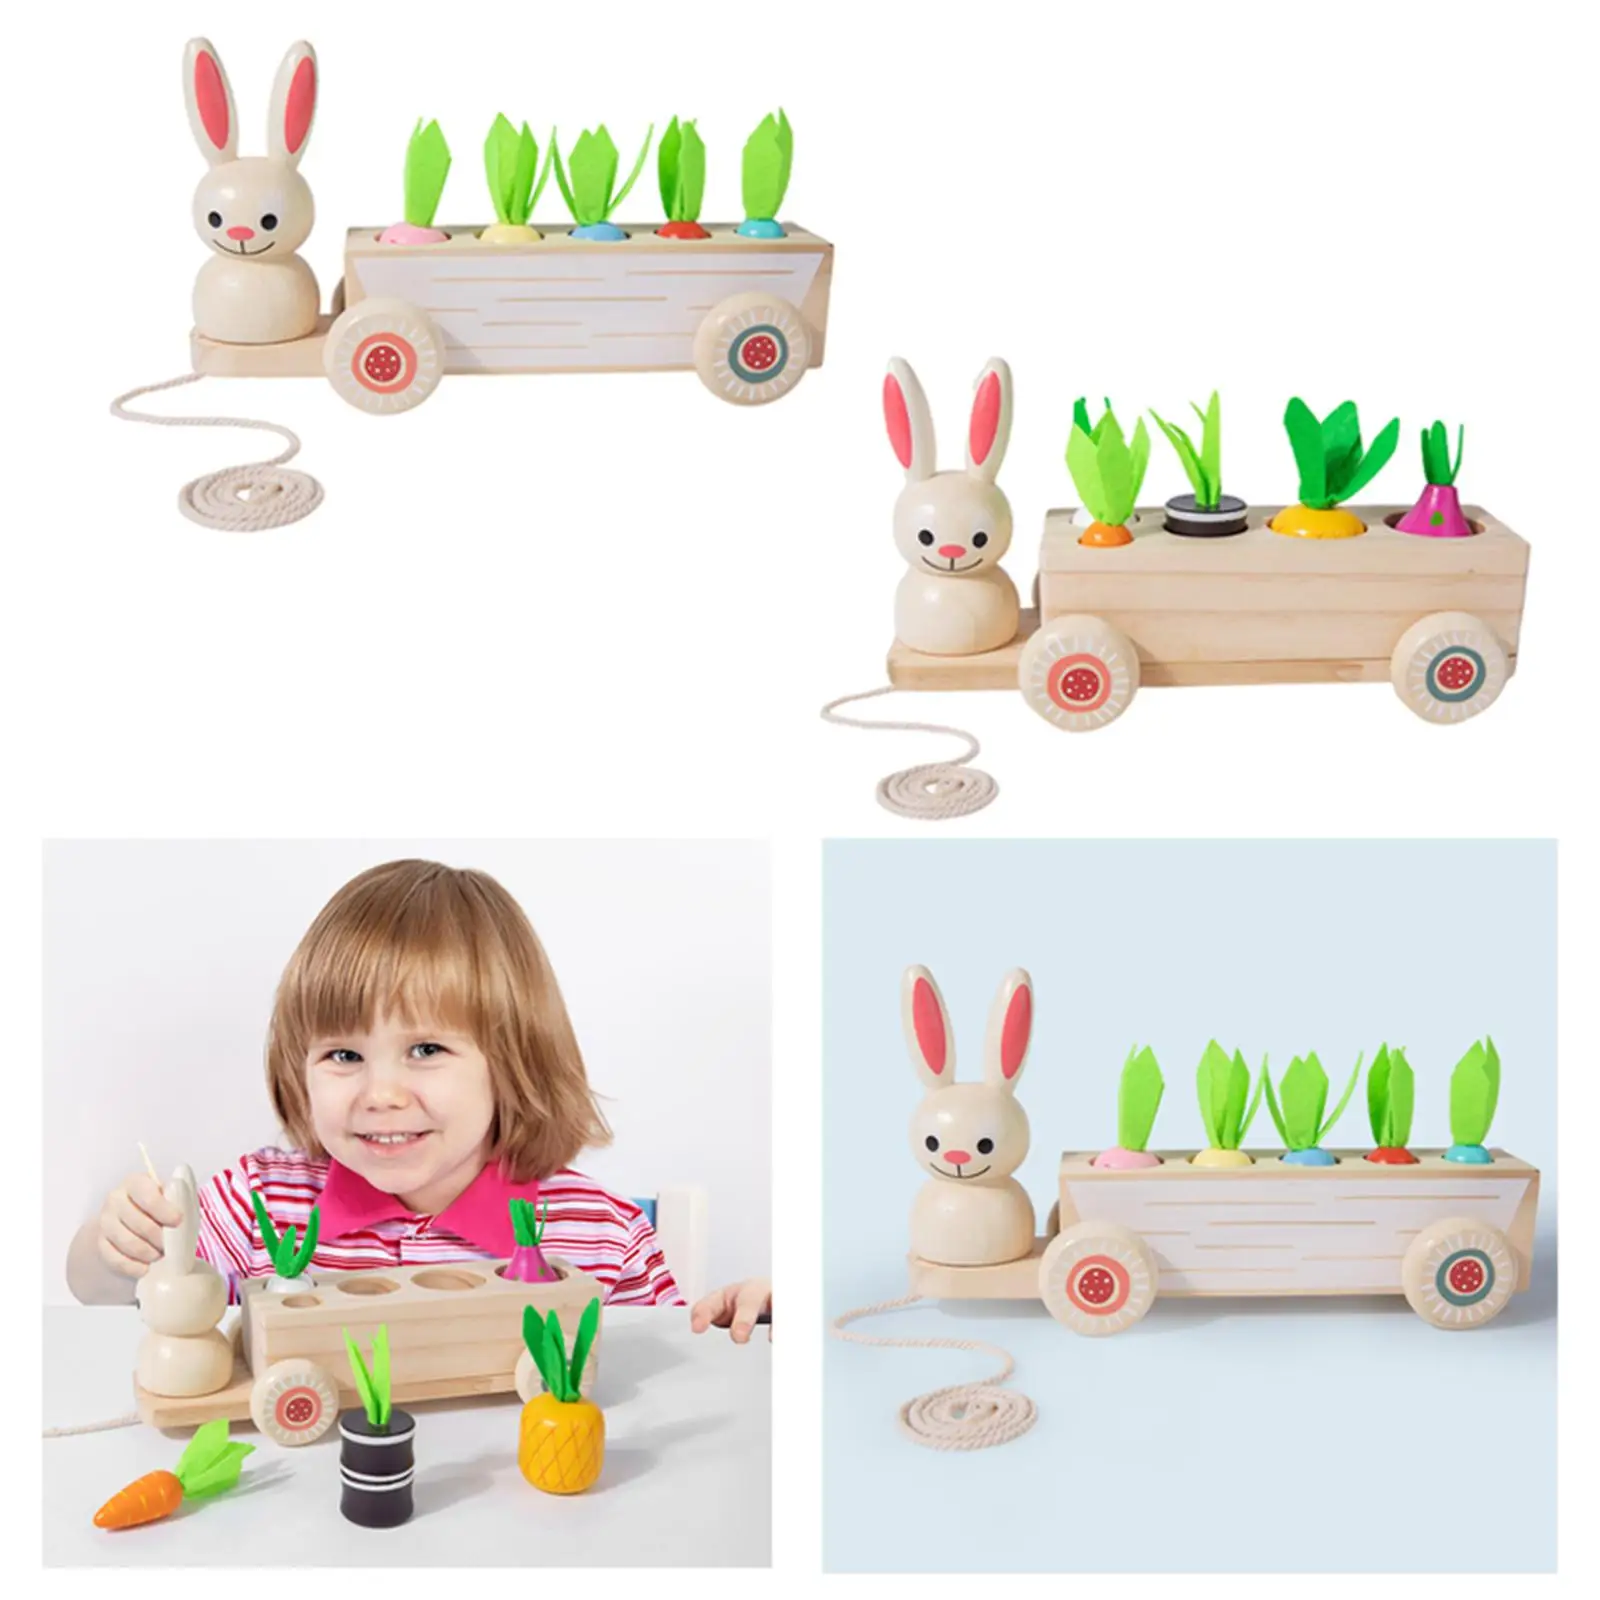 Kids Pulling Carrot Matching Game Board Game Educational Toys Montessori Toy